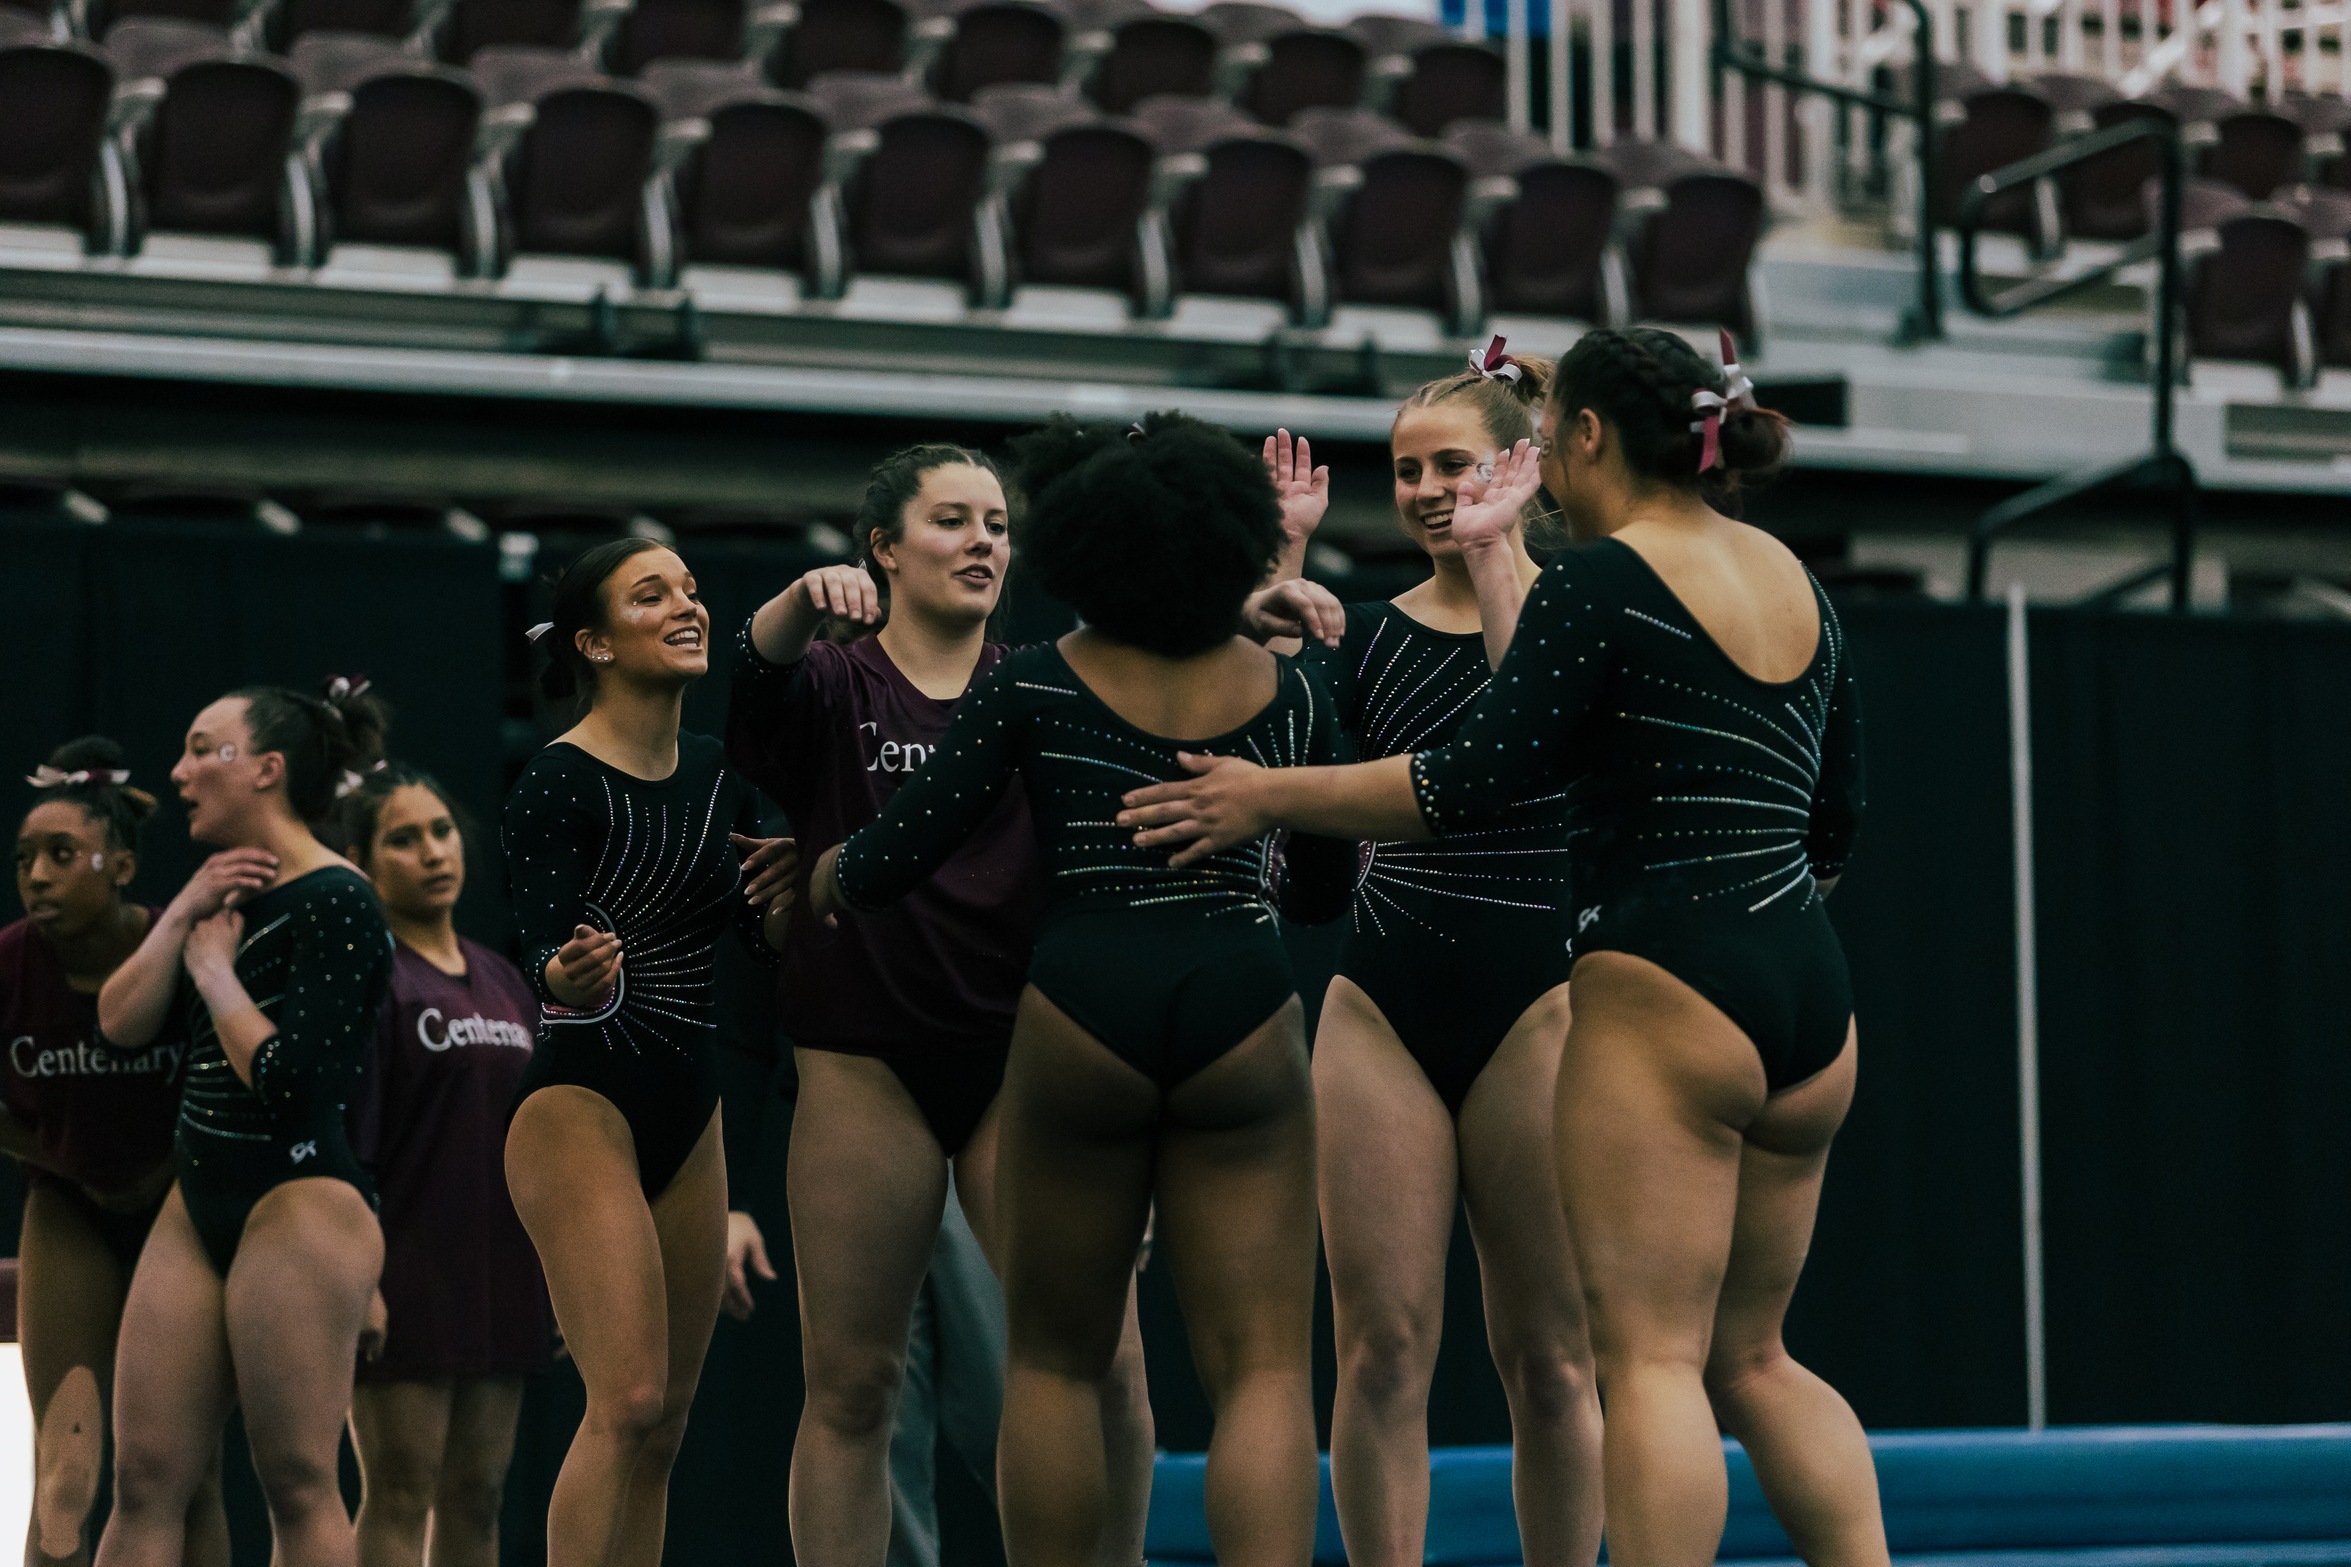 The Ladies will face the TWU Pioneers and Michigan State University on Sunday night in an MIC meet in Denton, Texas.